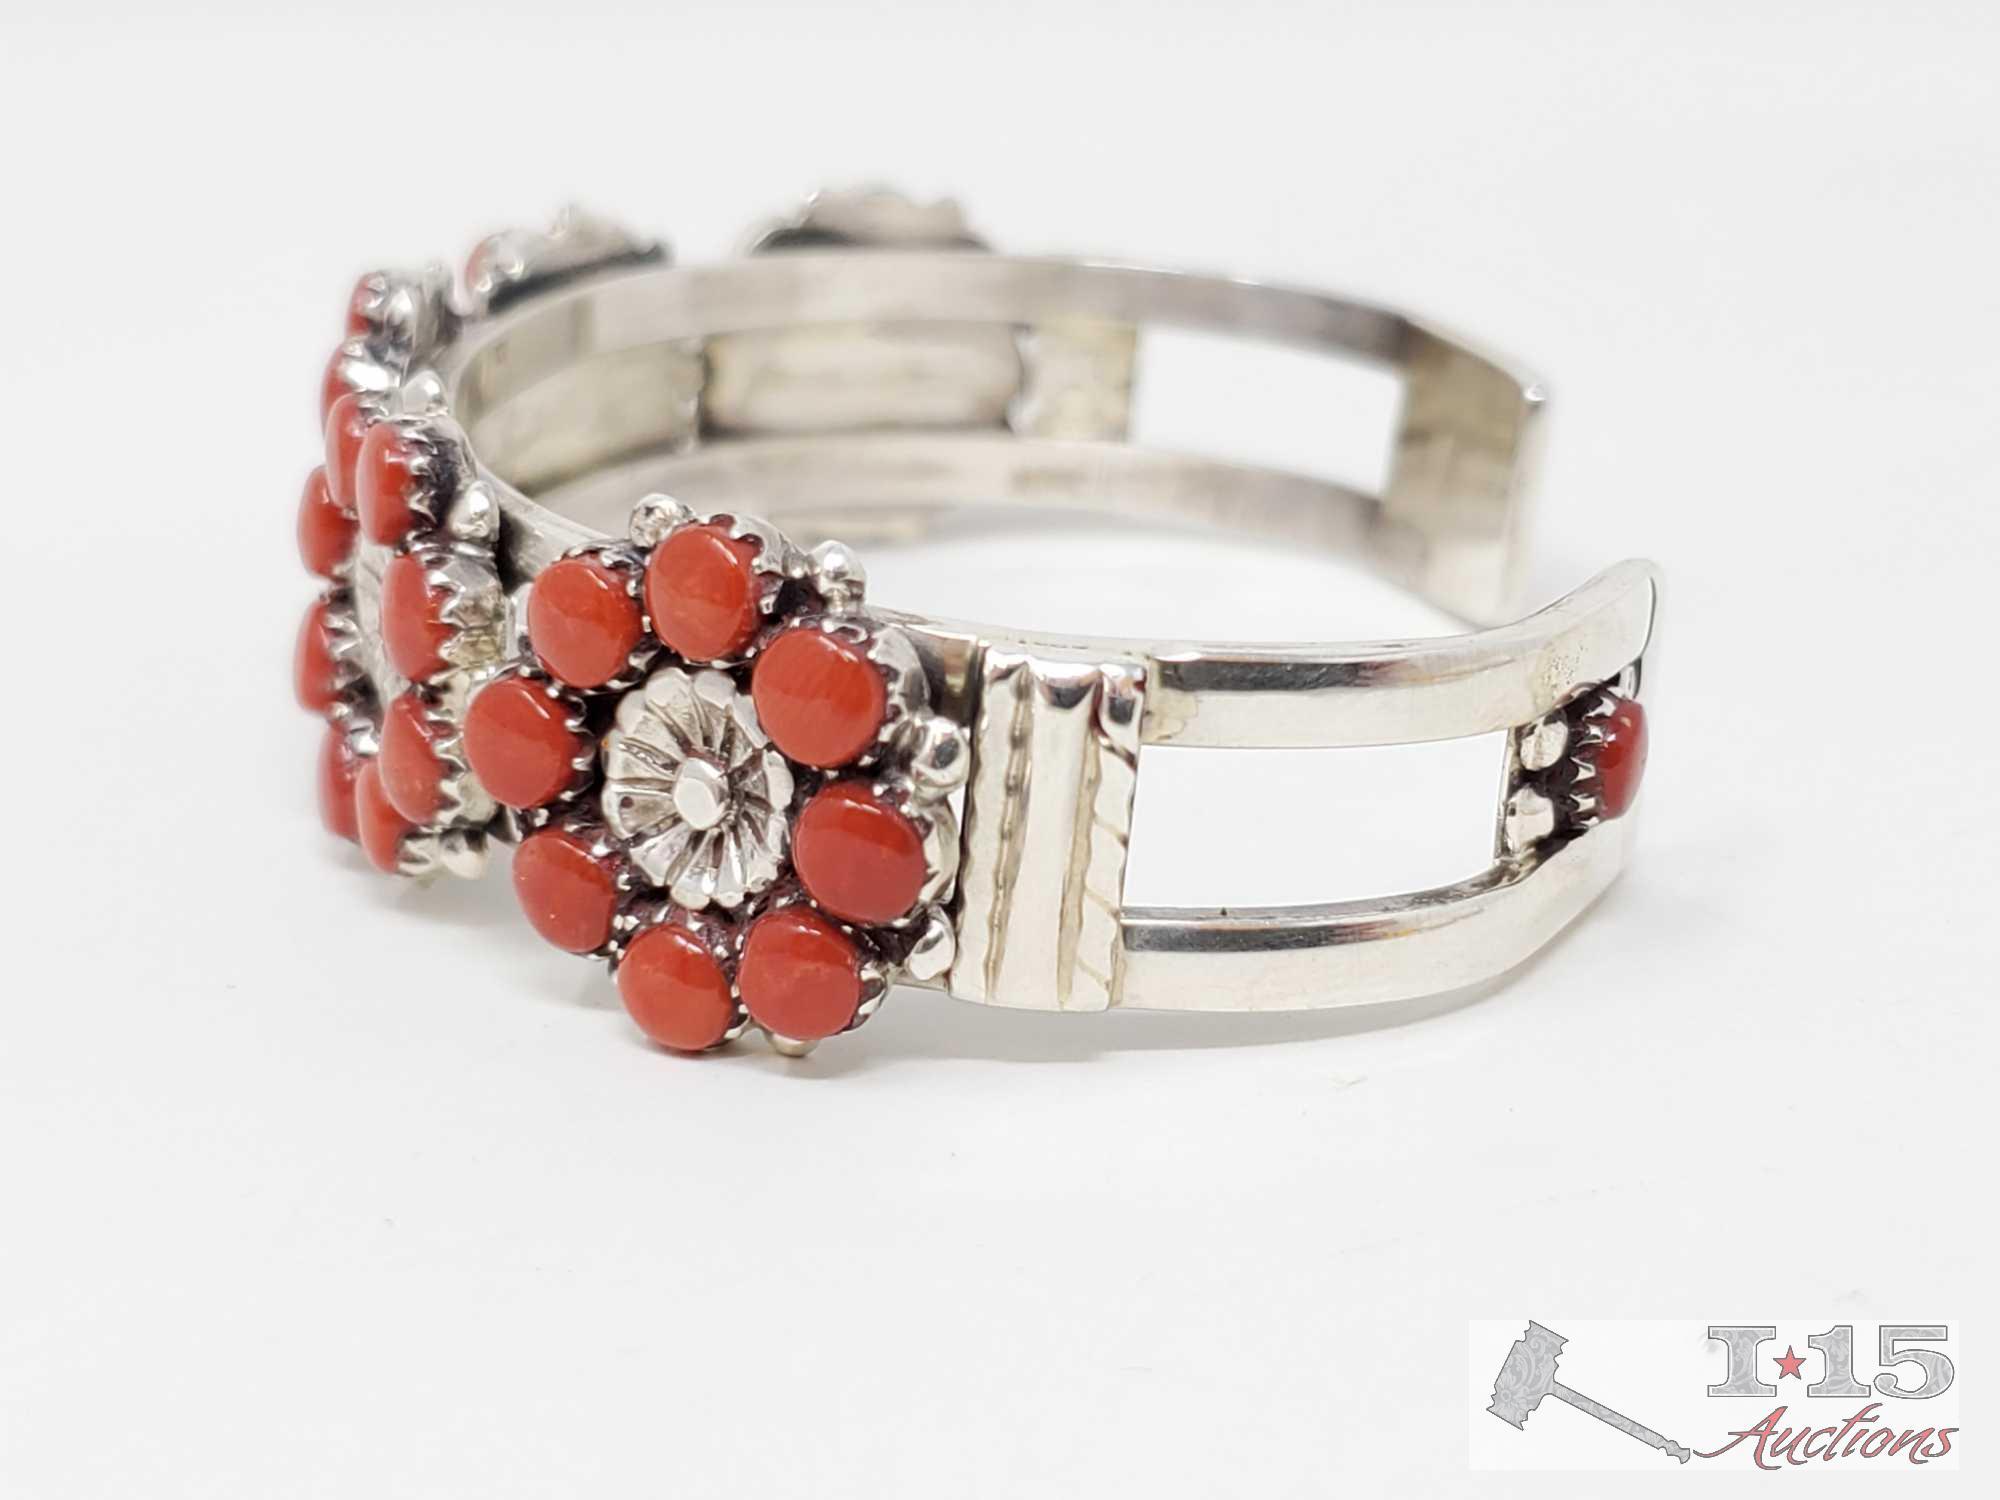 E. Wayco Sterling Silver Cuff With Coral Stones And Matching Ring, 39g